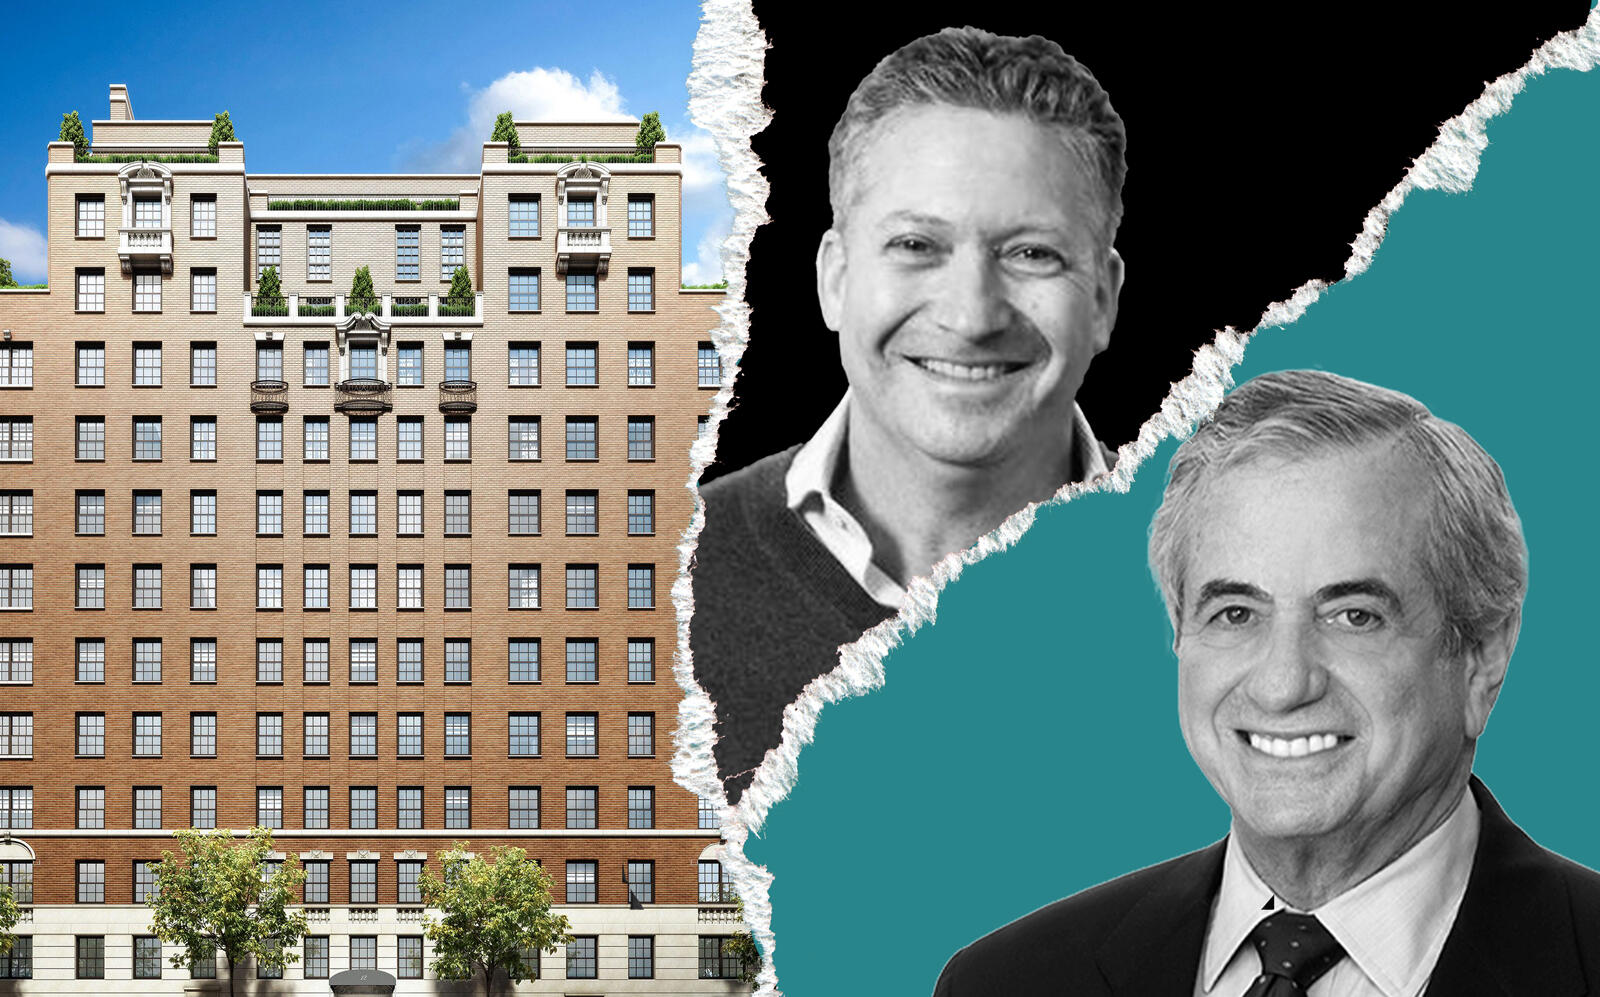 12 East 88th Street, Jonathan Simon of Simon Baron Development, and Barry Fox, attorney retired from Cleary Gottlieb (Rosario Candela, Cleary Gottlieb)